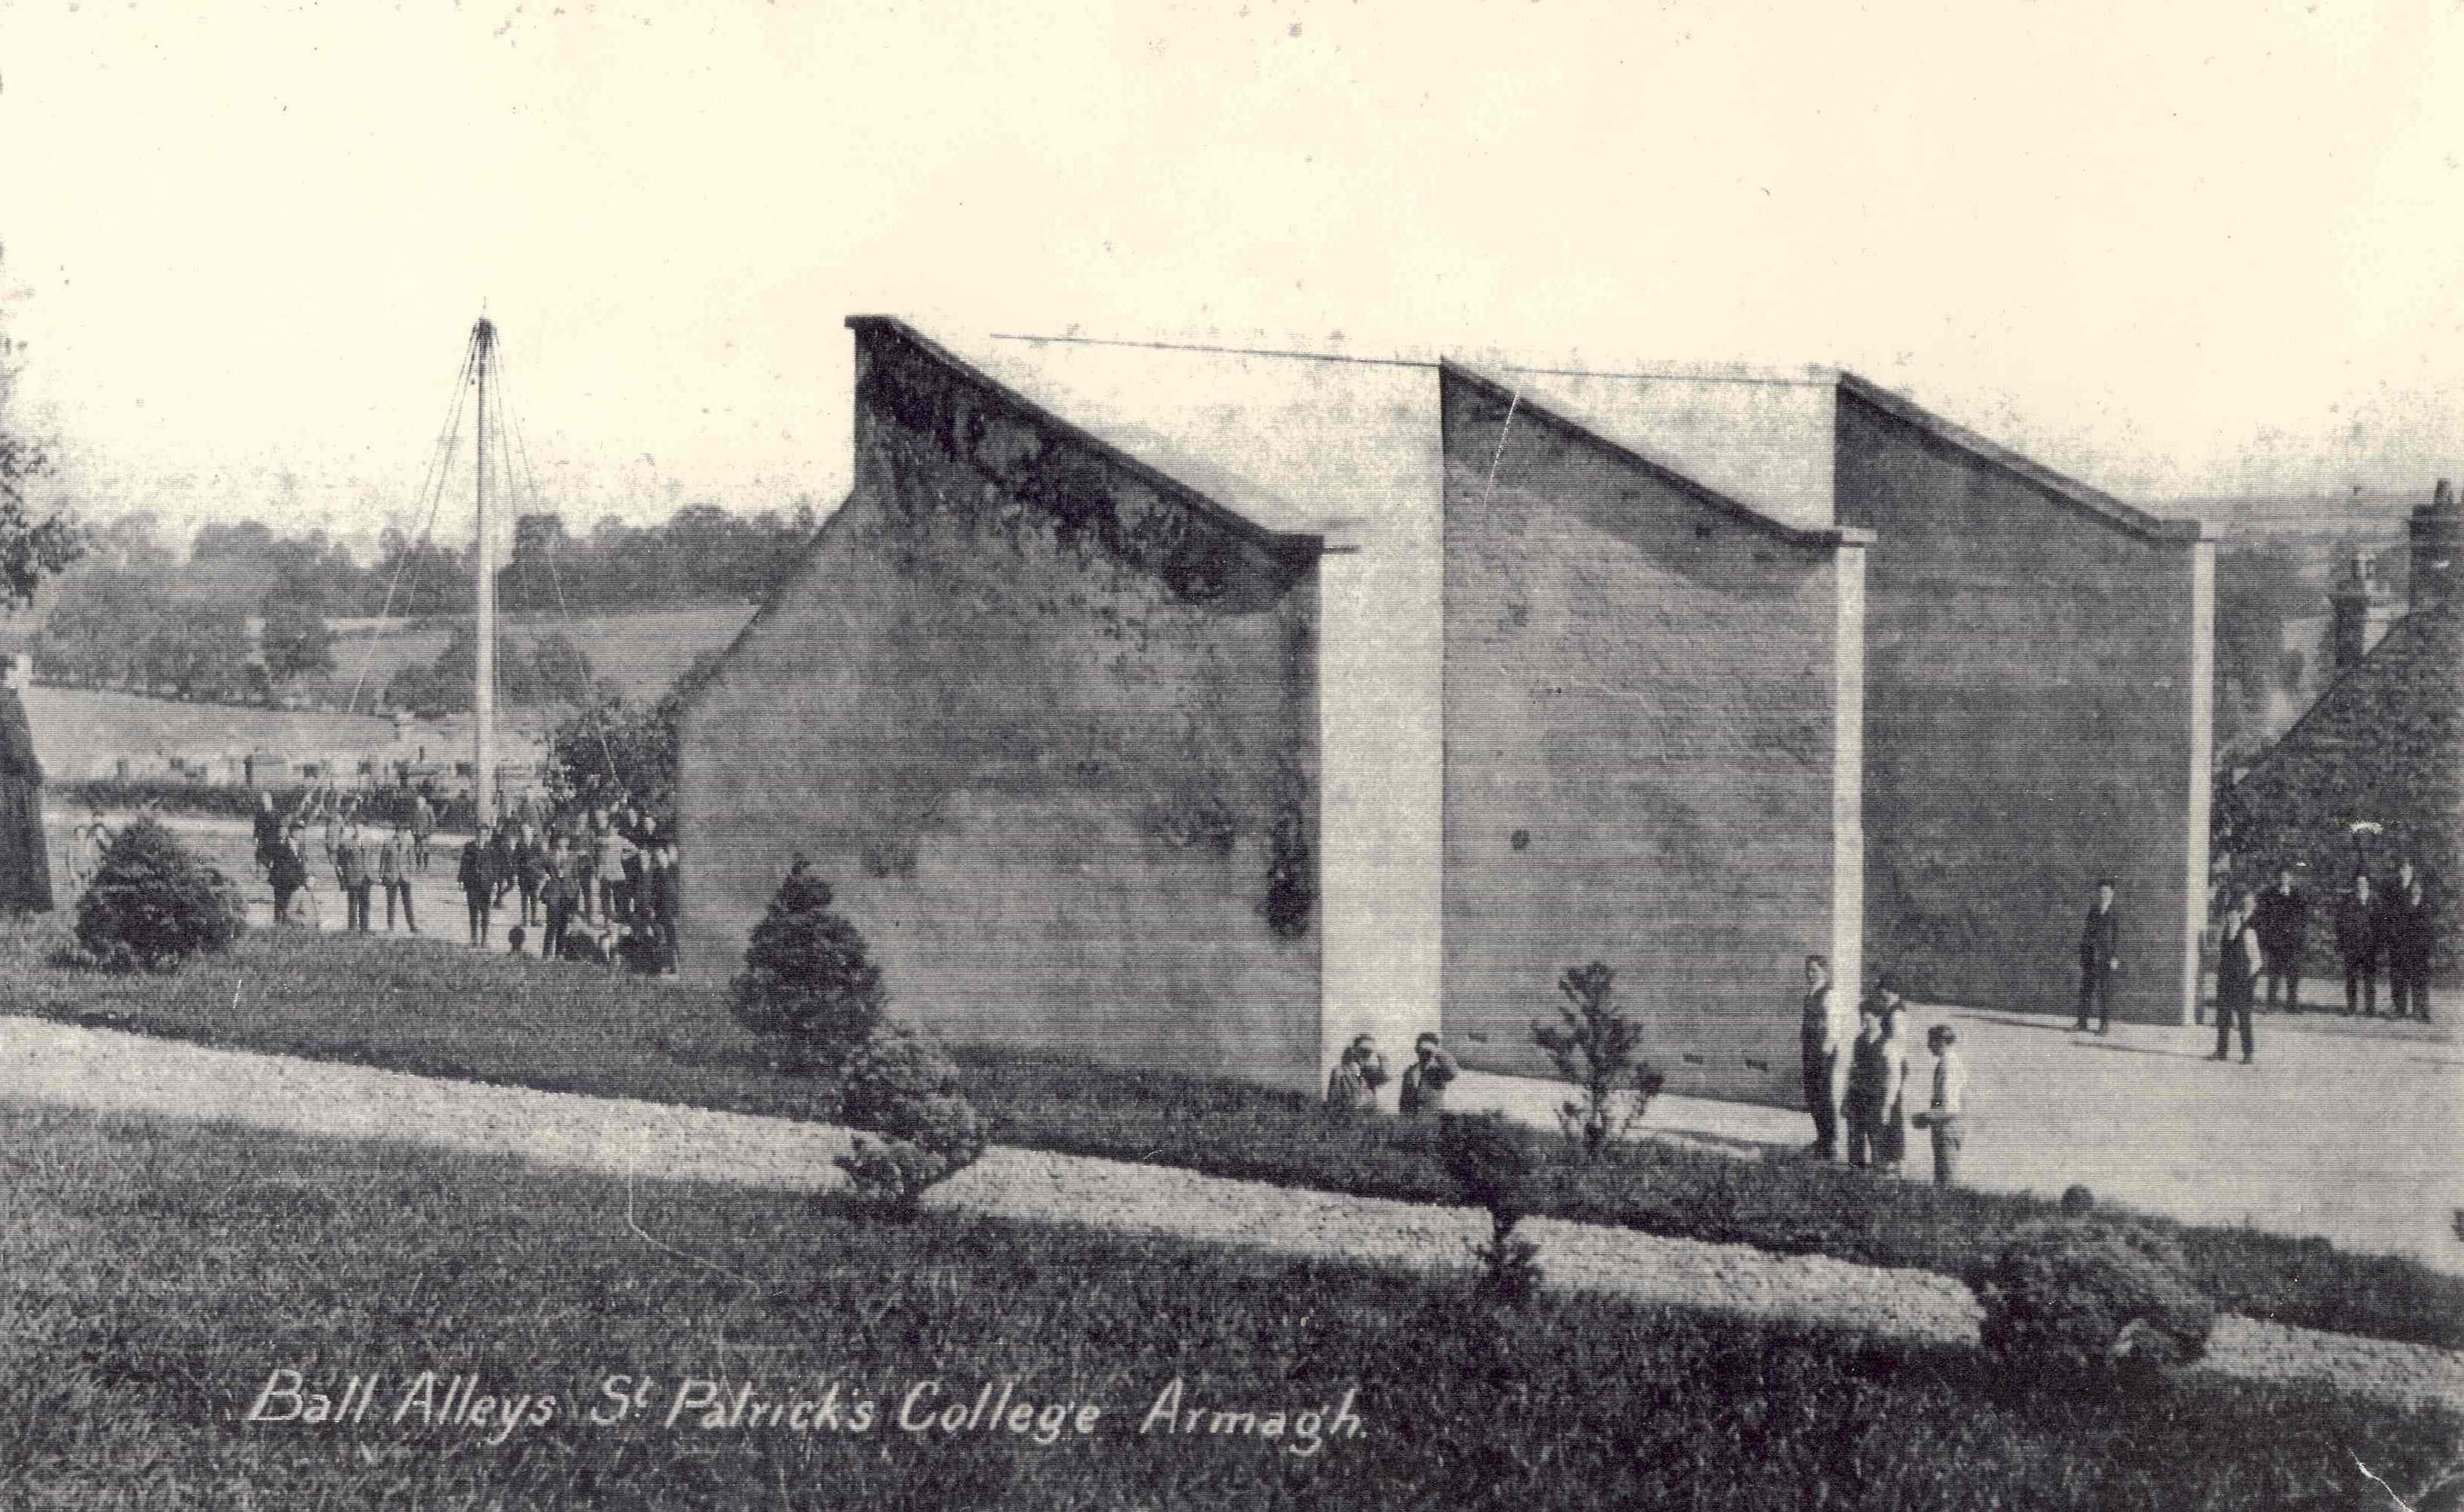 Playing handball at St. Patrick's College, Armagh, in the 1920s.